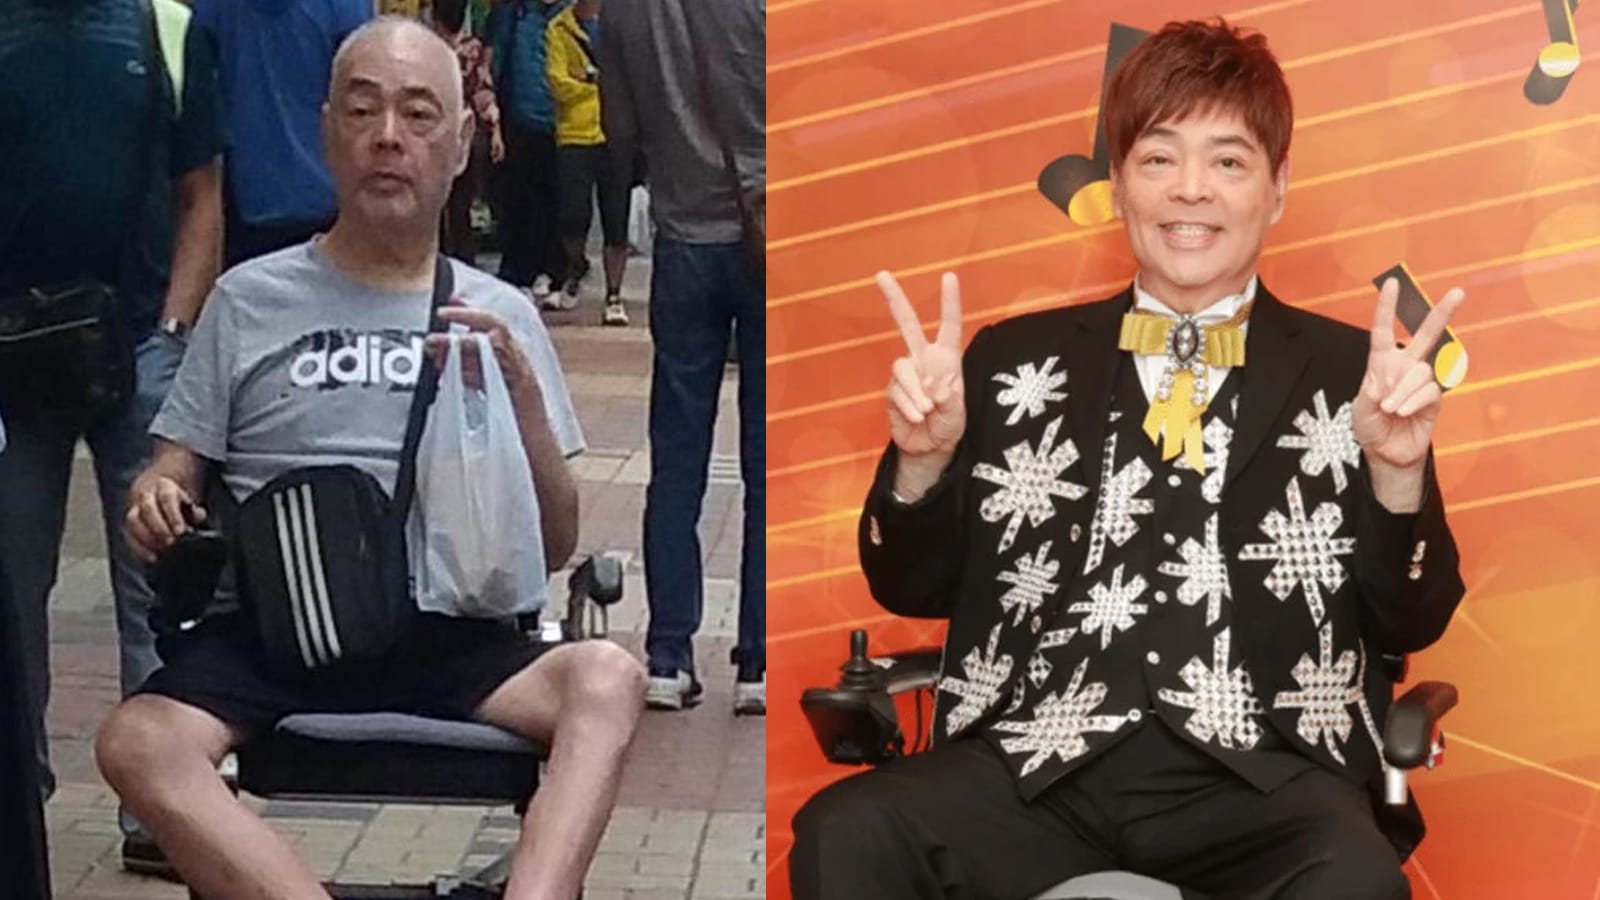 HK Singer Donald Cheung, 69, Hospitalised After Testing Positive For COVID-19 — “His Condition Has Worsened And Things Don’t Look Good,” Says Hospital